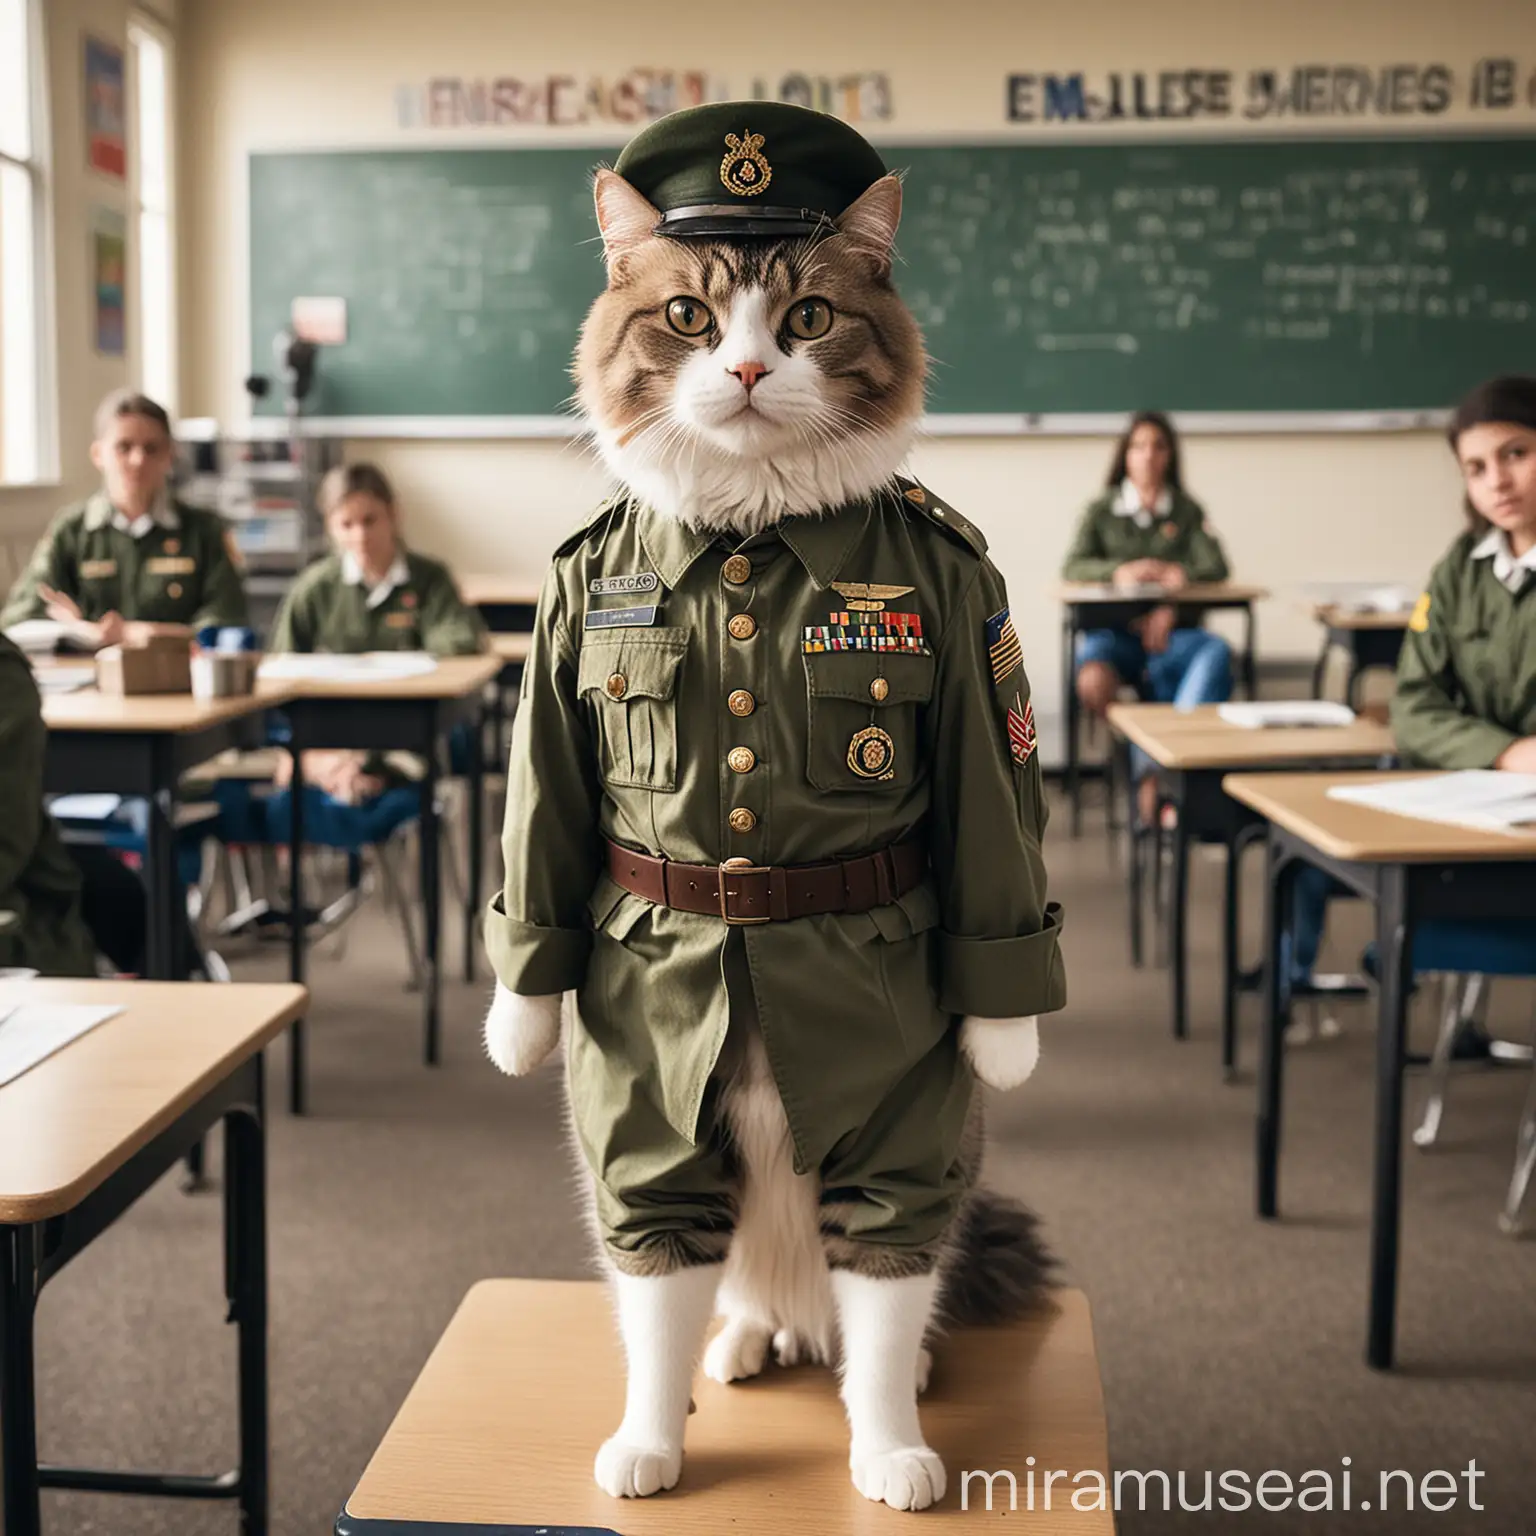 Military Cat Teaching Biology to Students in Classroom